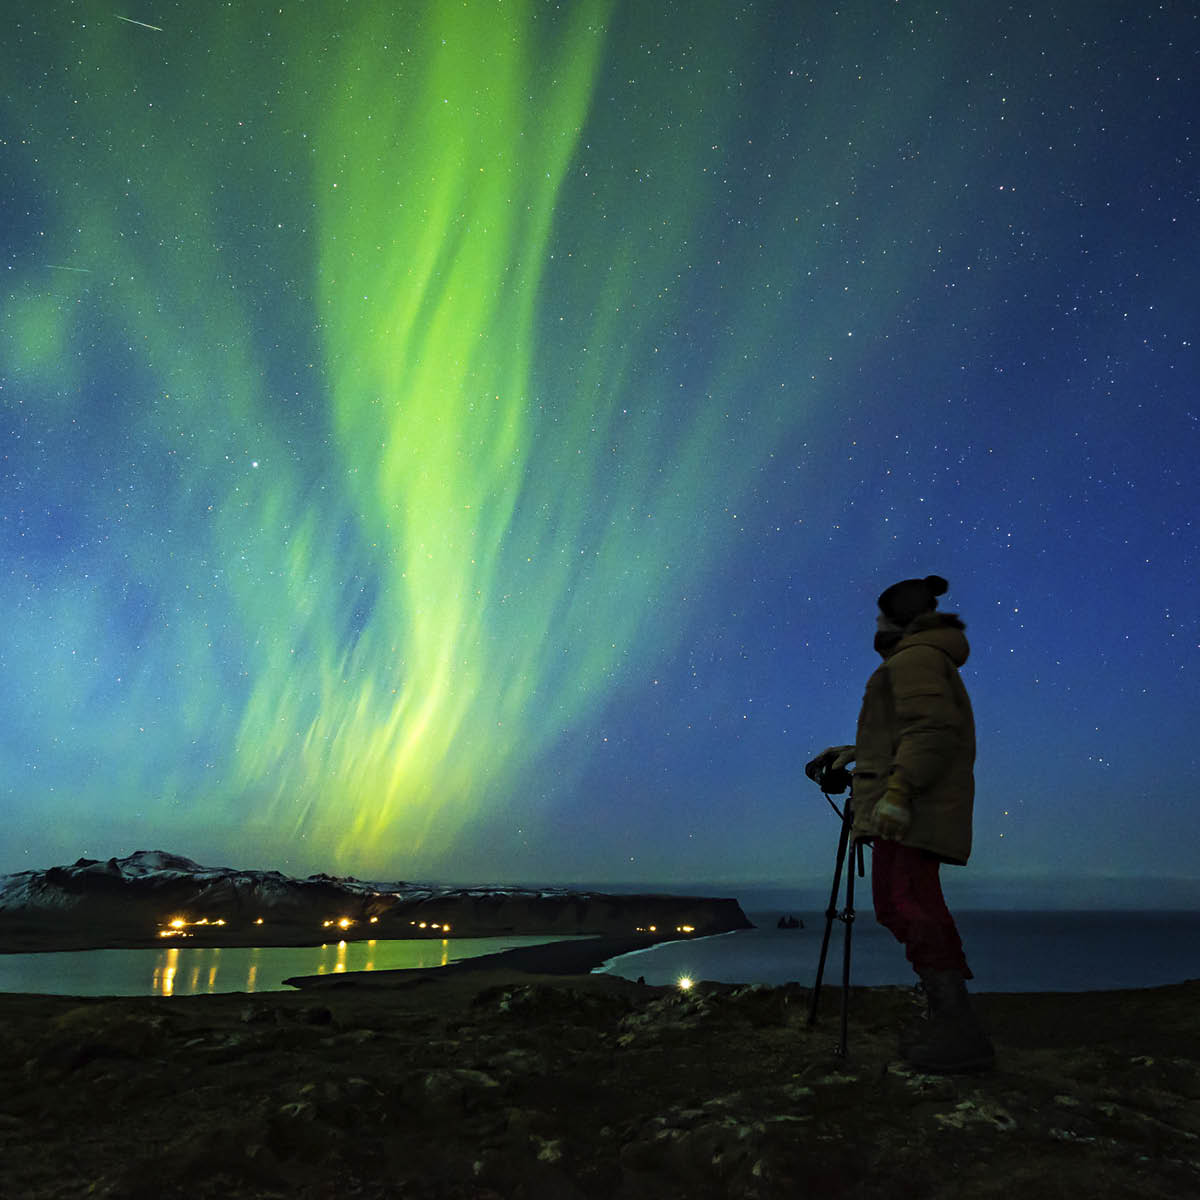 where are the northern lights?